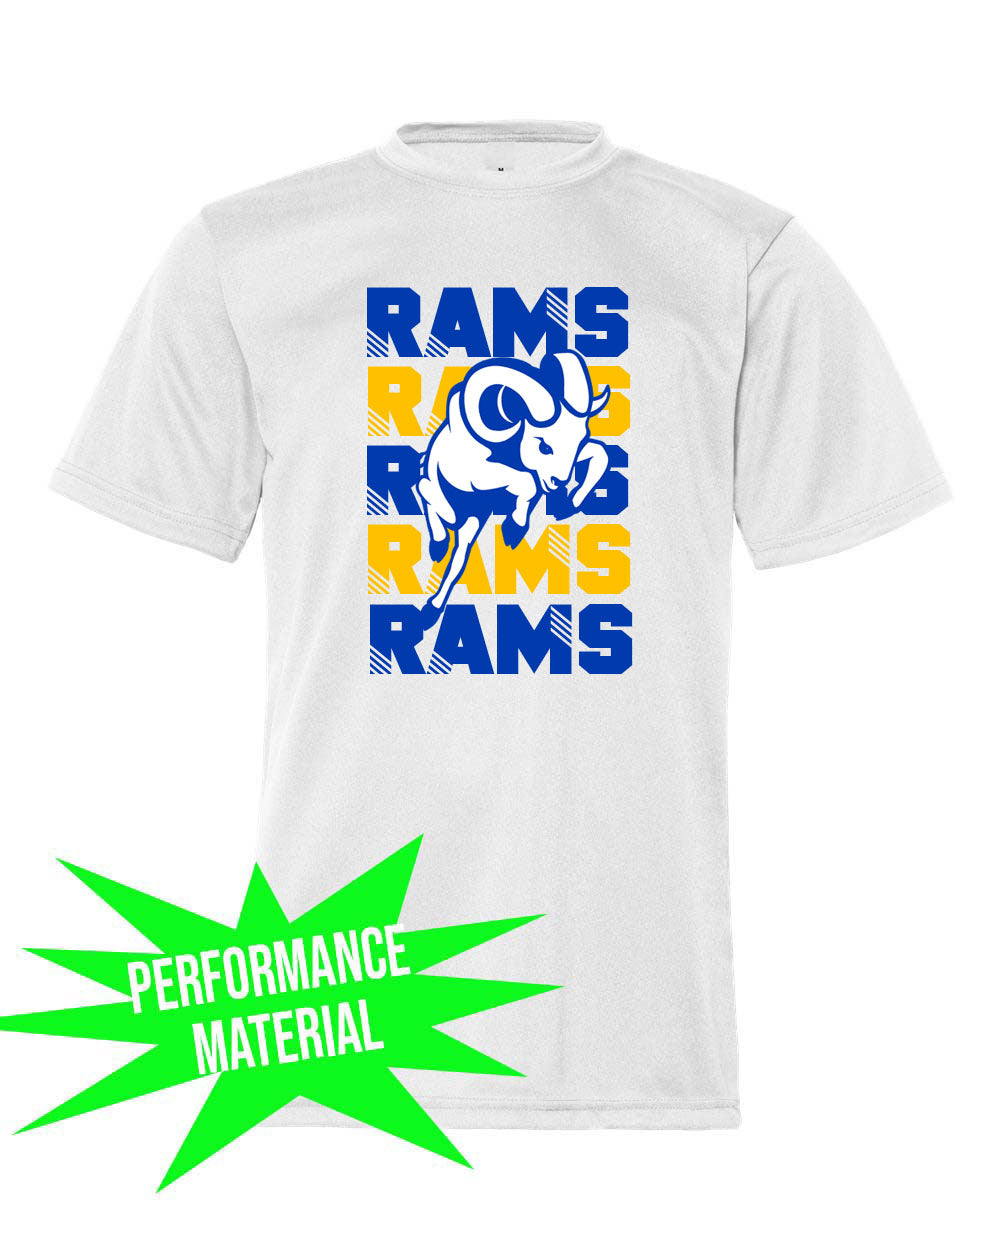 Sussex Middle Performance Material design 6 T-Shirt